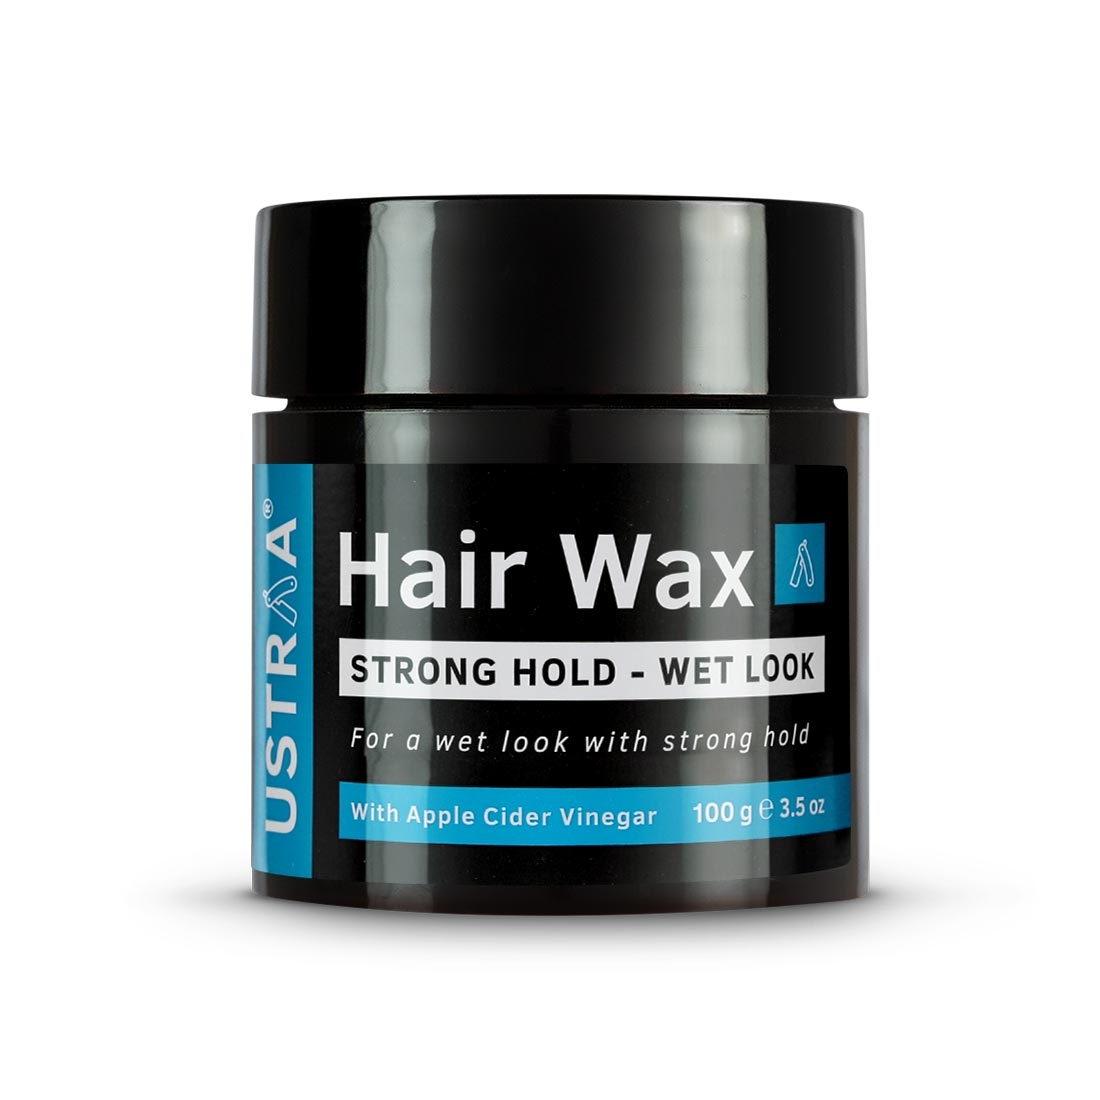 Hair Wax - Strong Hold - Wet Look 100g